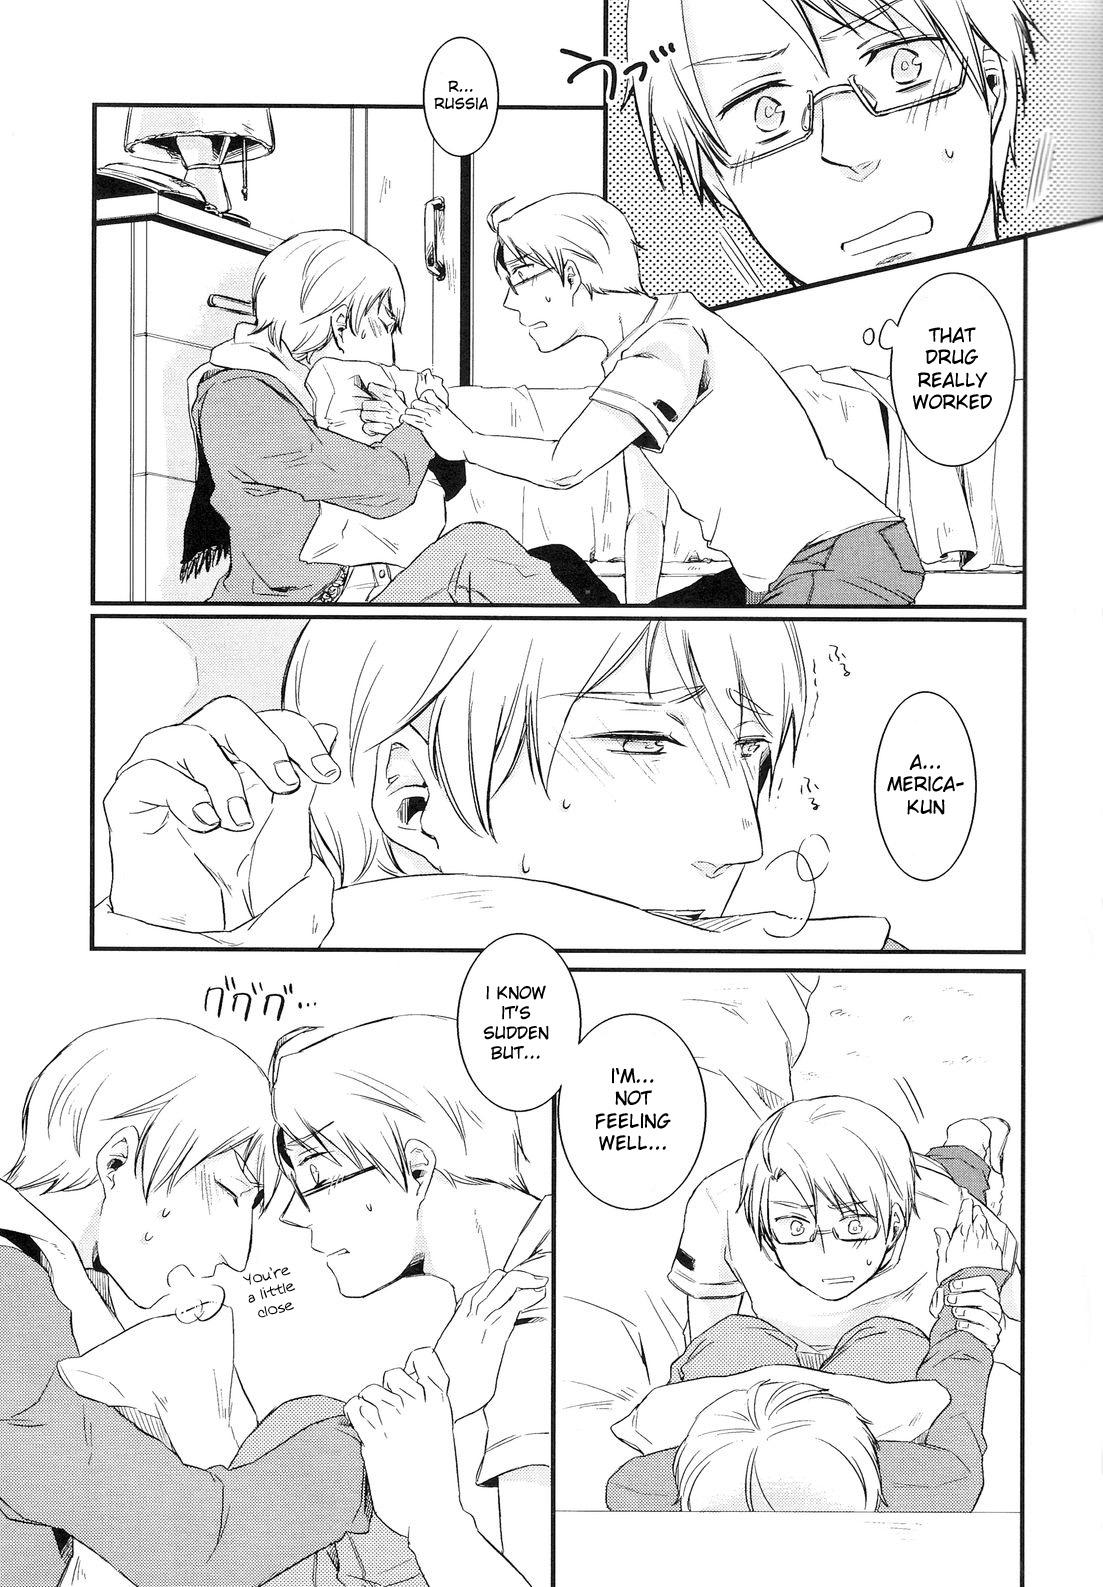 Amatures Gone Wild NO PROBLEM - Axis powers hetalia Granny - Page 12